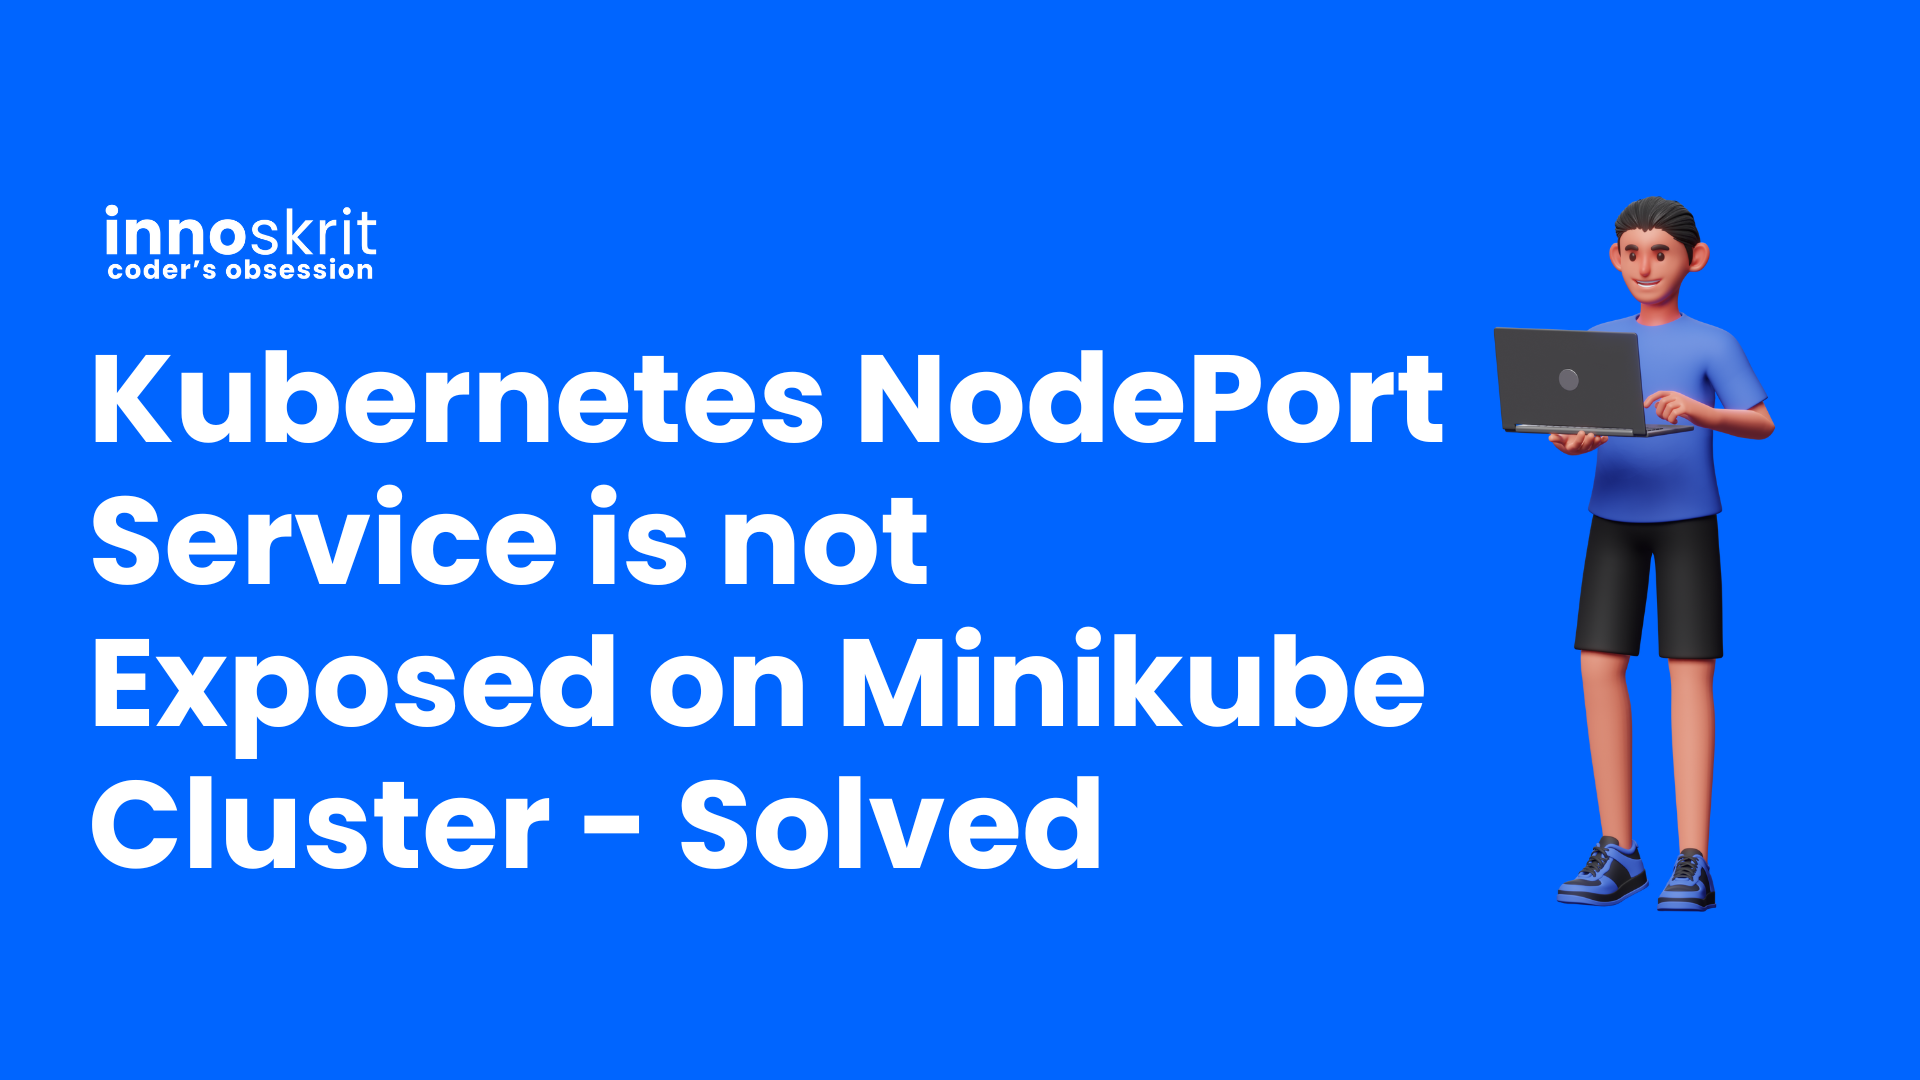 Kubernetes NodePort Service is not Exposed on Minikube Cluster - Solved